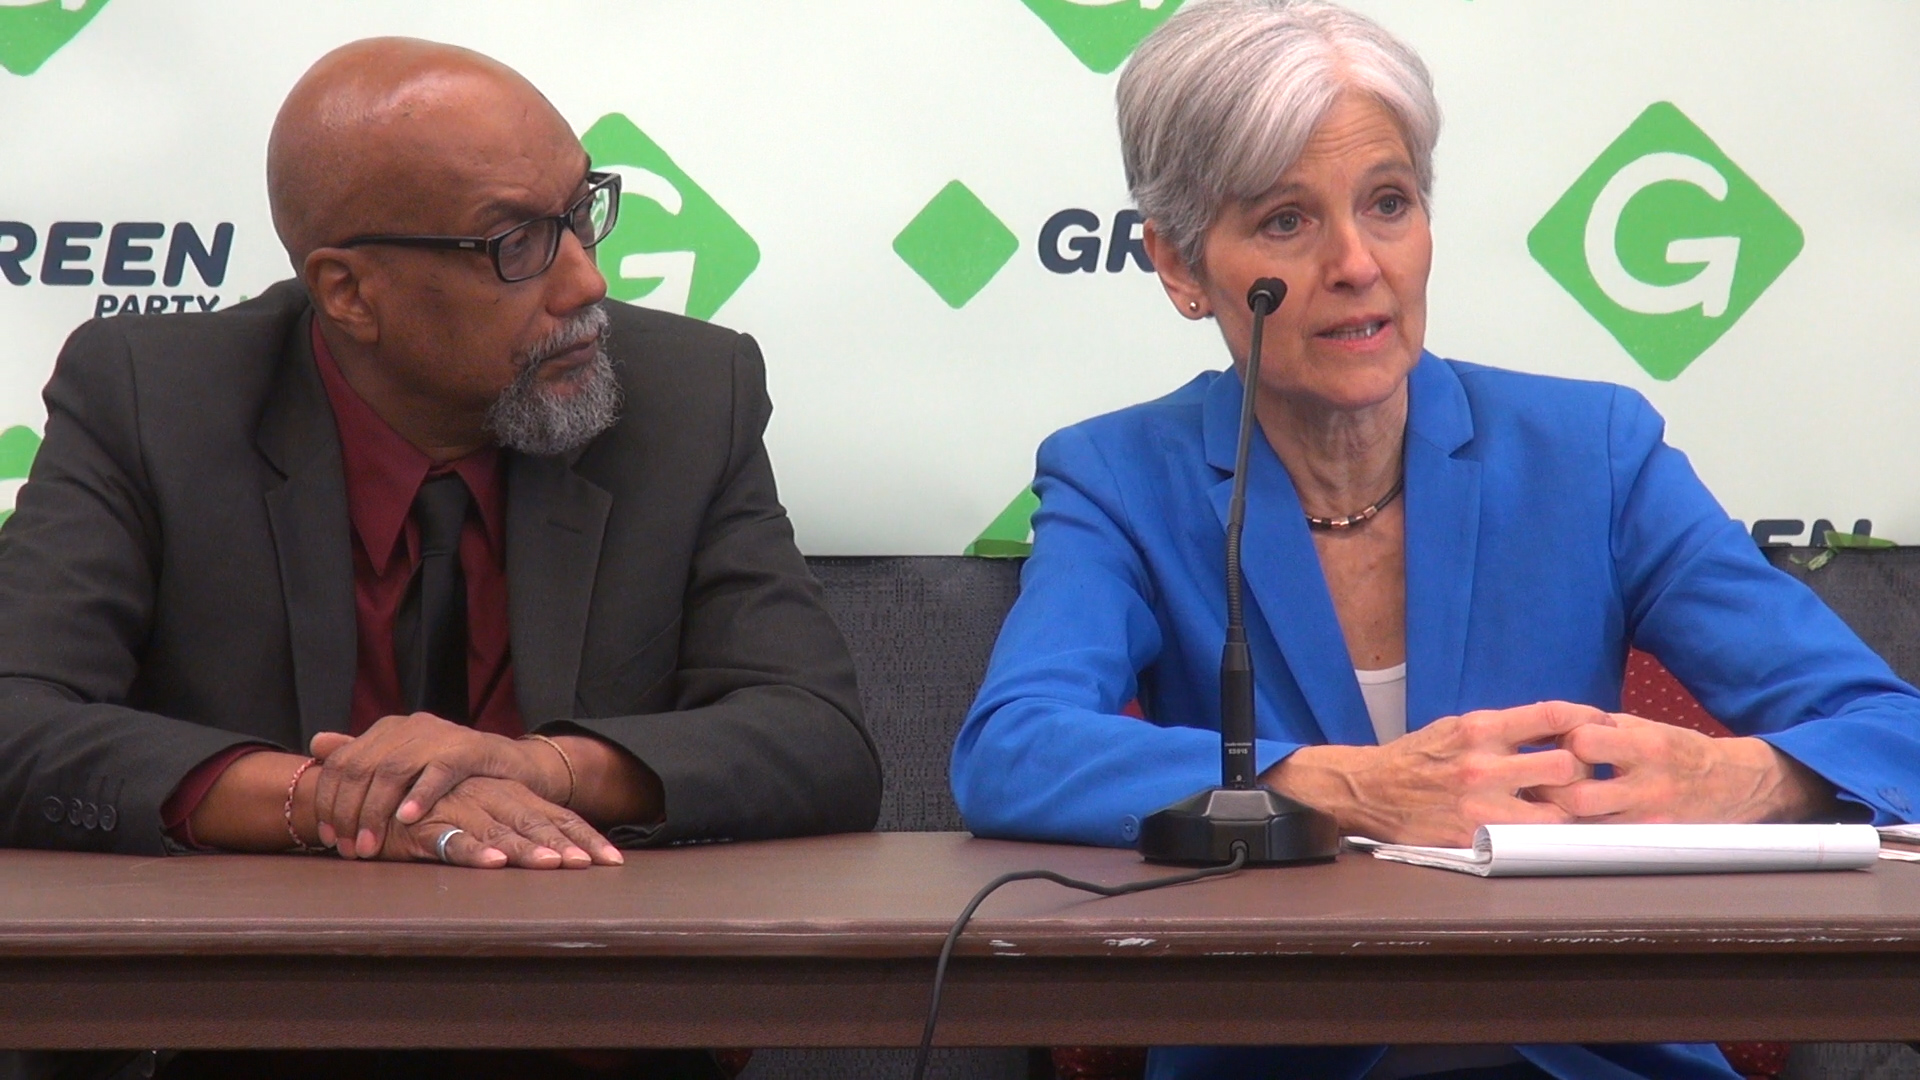 Green Party candidate Jill Stein and her running mate Ajamu Baraka. Photo from Wikimedia Commons